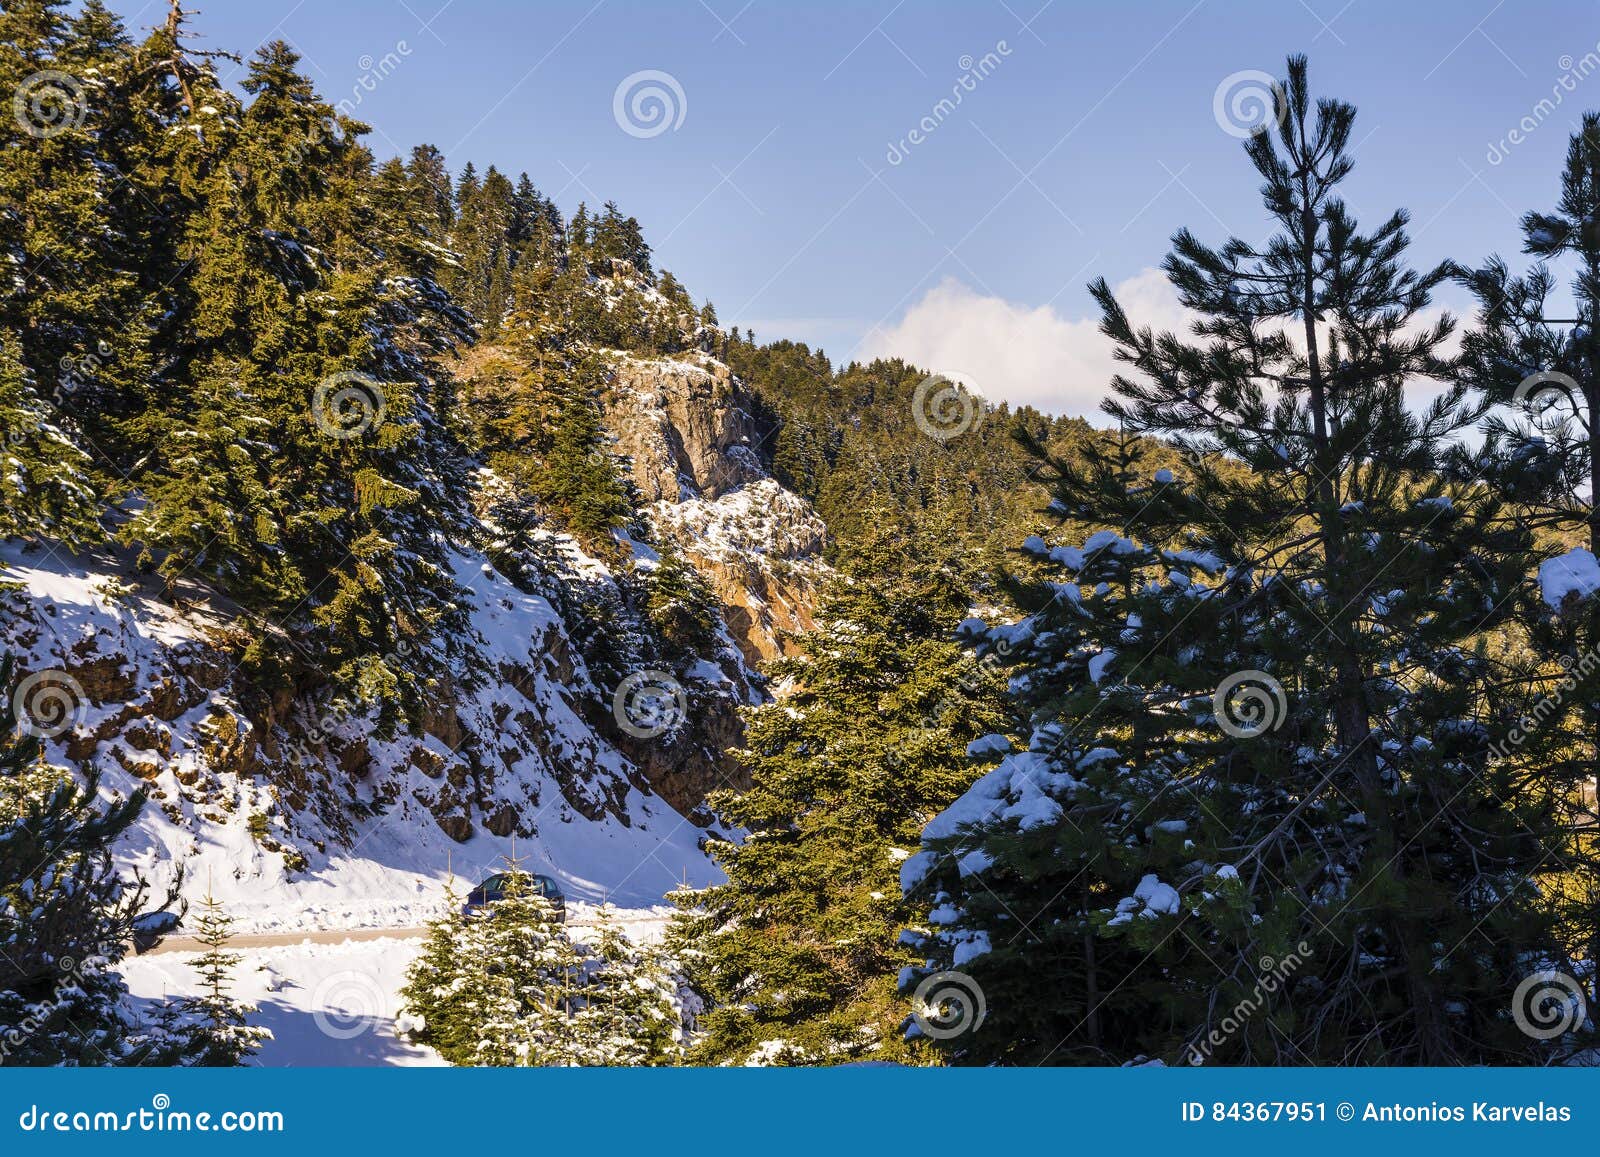 ziria mountain covered with snow on a winter day, south peloponnese, greece